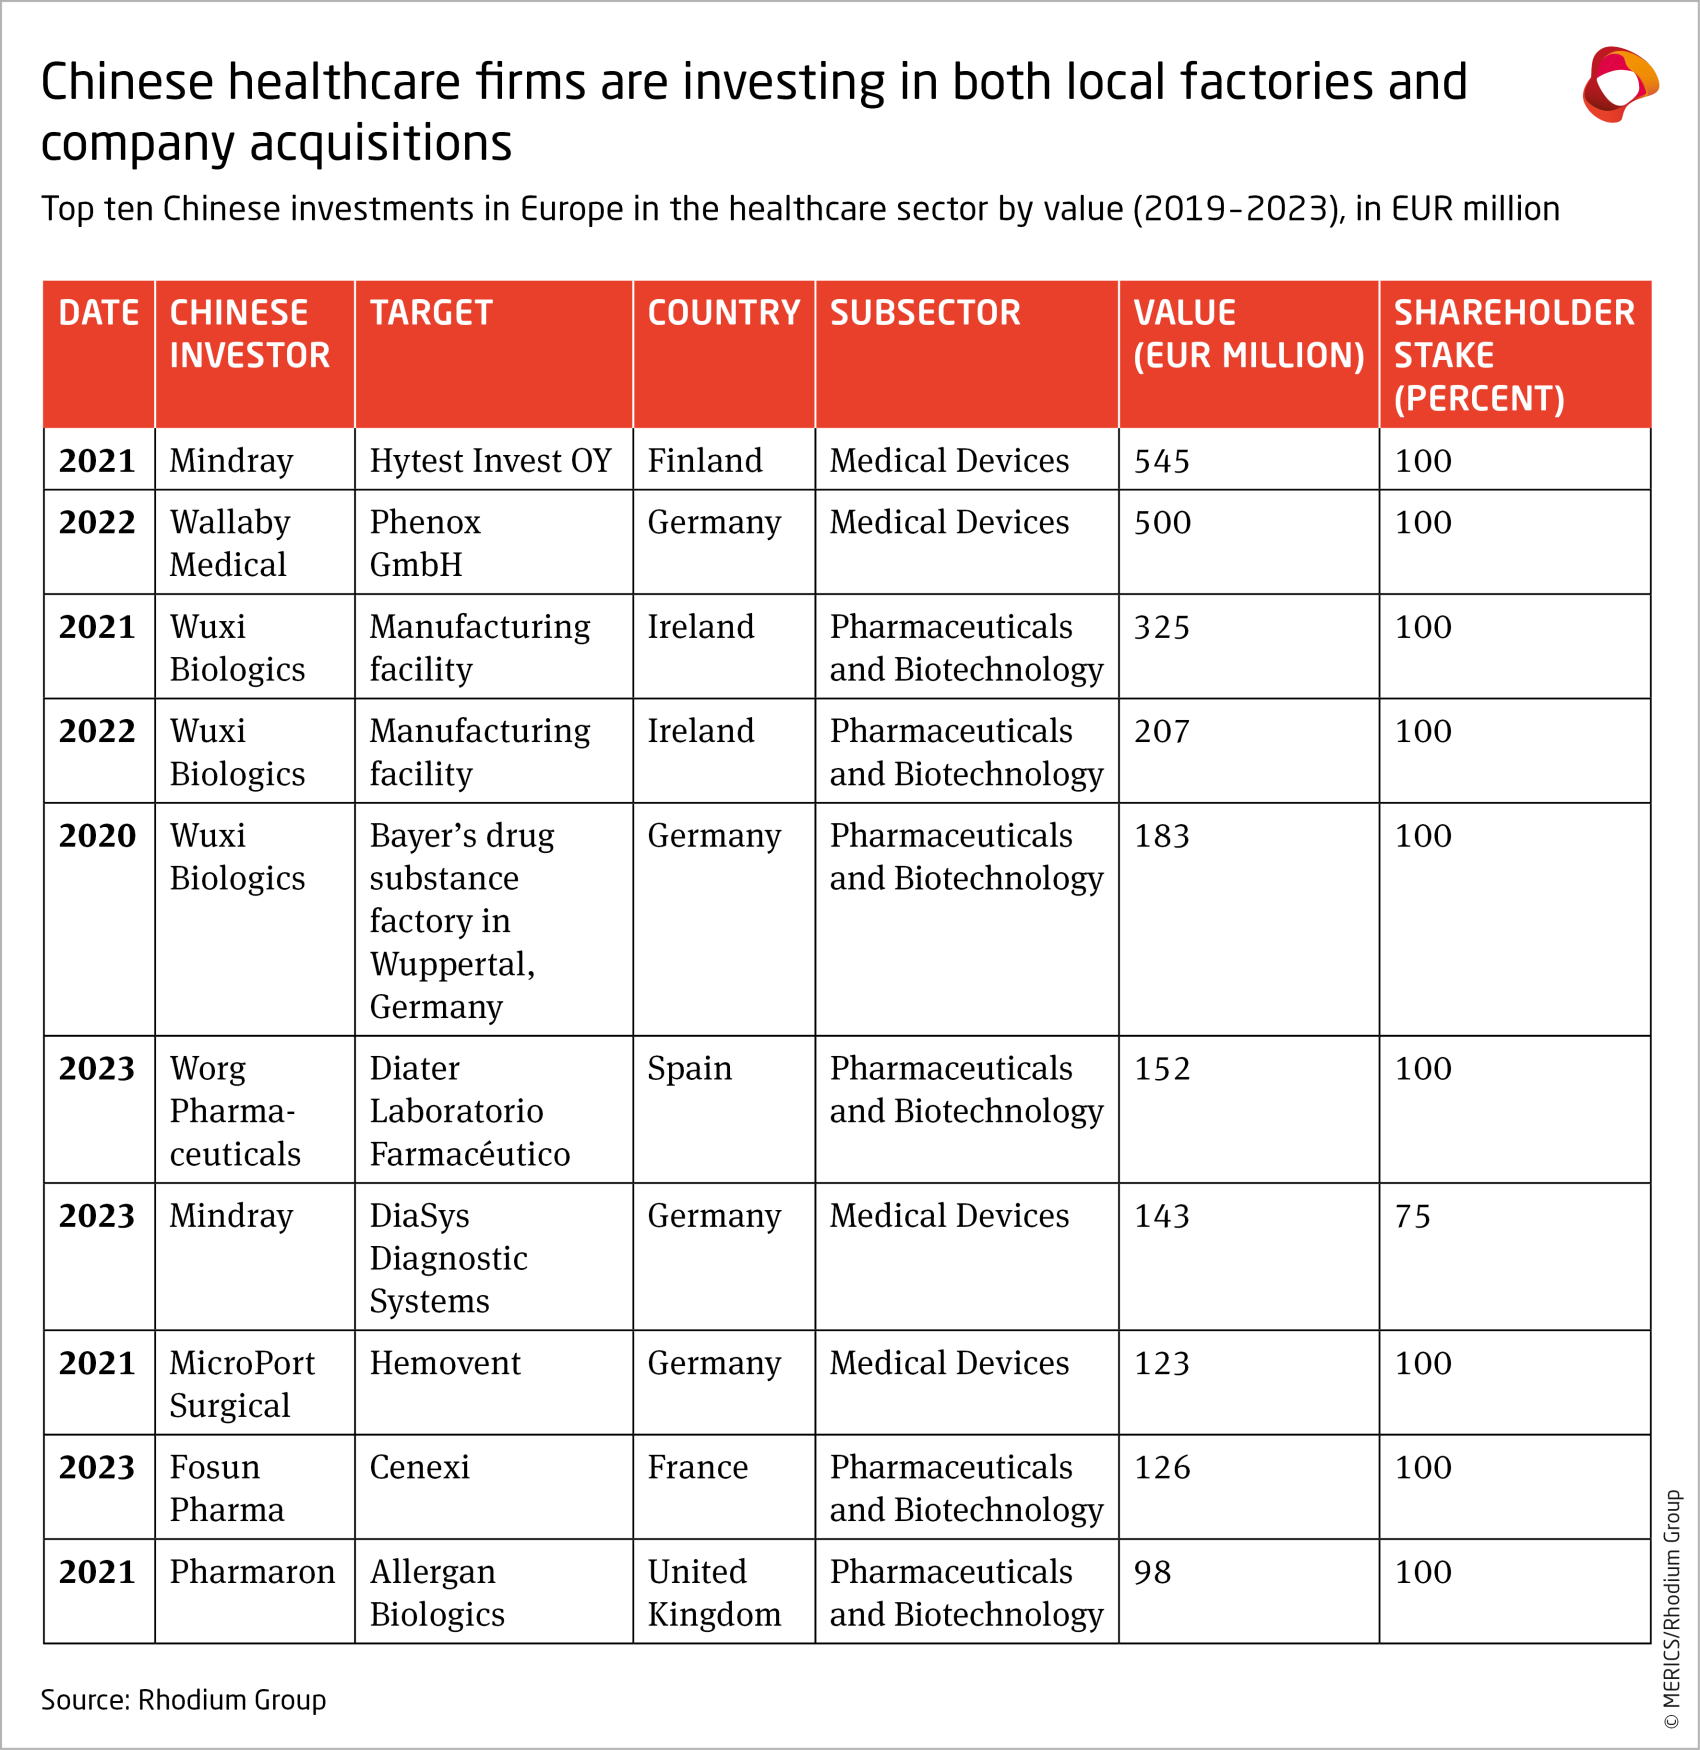 merics-rhodium-group-chinese-fdi-in-europe-2023-top-ten-chinese-investments-in-europe-healthcare-sector-exhibit-12.png